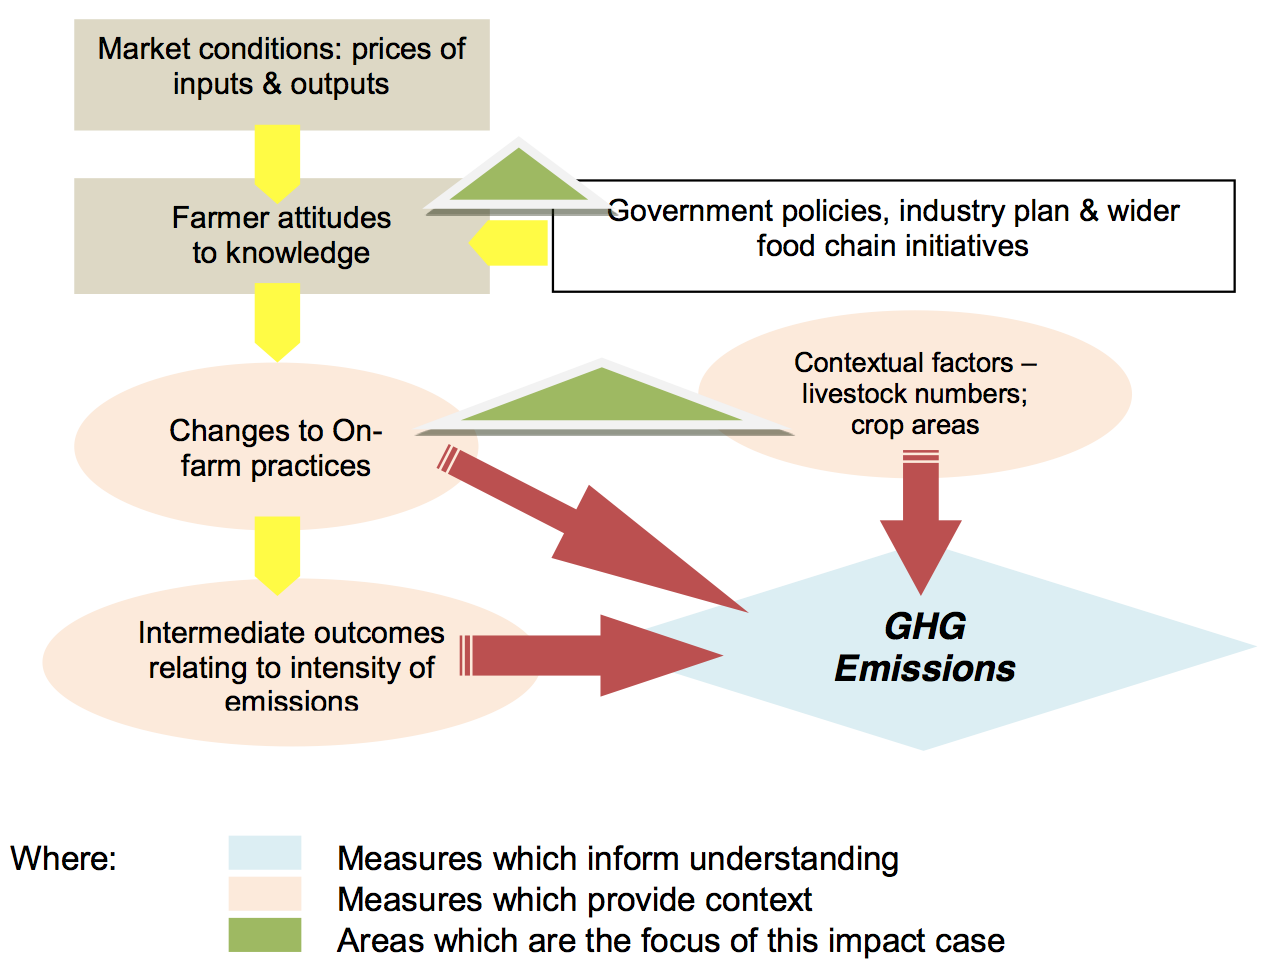 Figure 1. Relationship between key factors driving UK agribusiness GHG abatement (source: adapted from DEFRA, Climate Change Mitigation, Agriculture and
Food Chain unit)